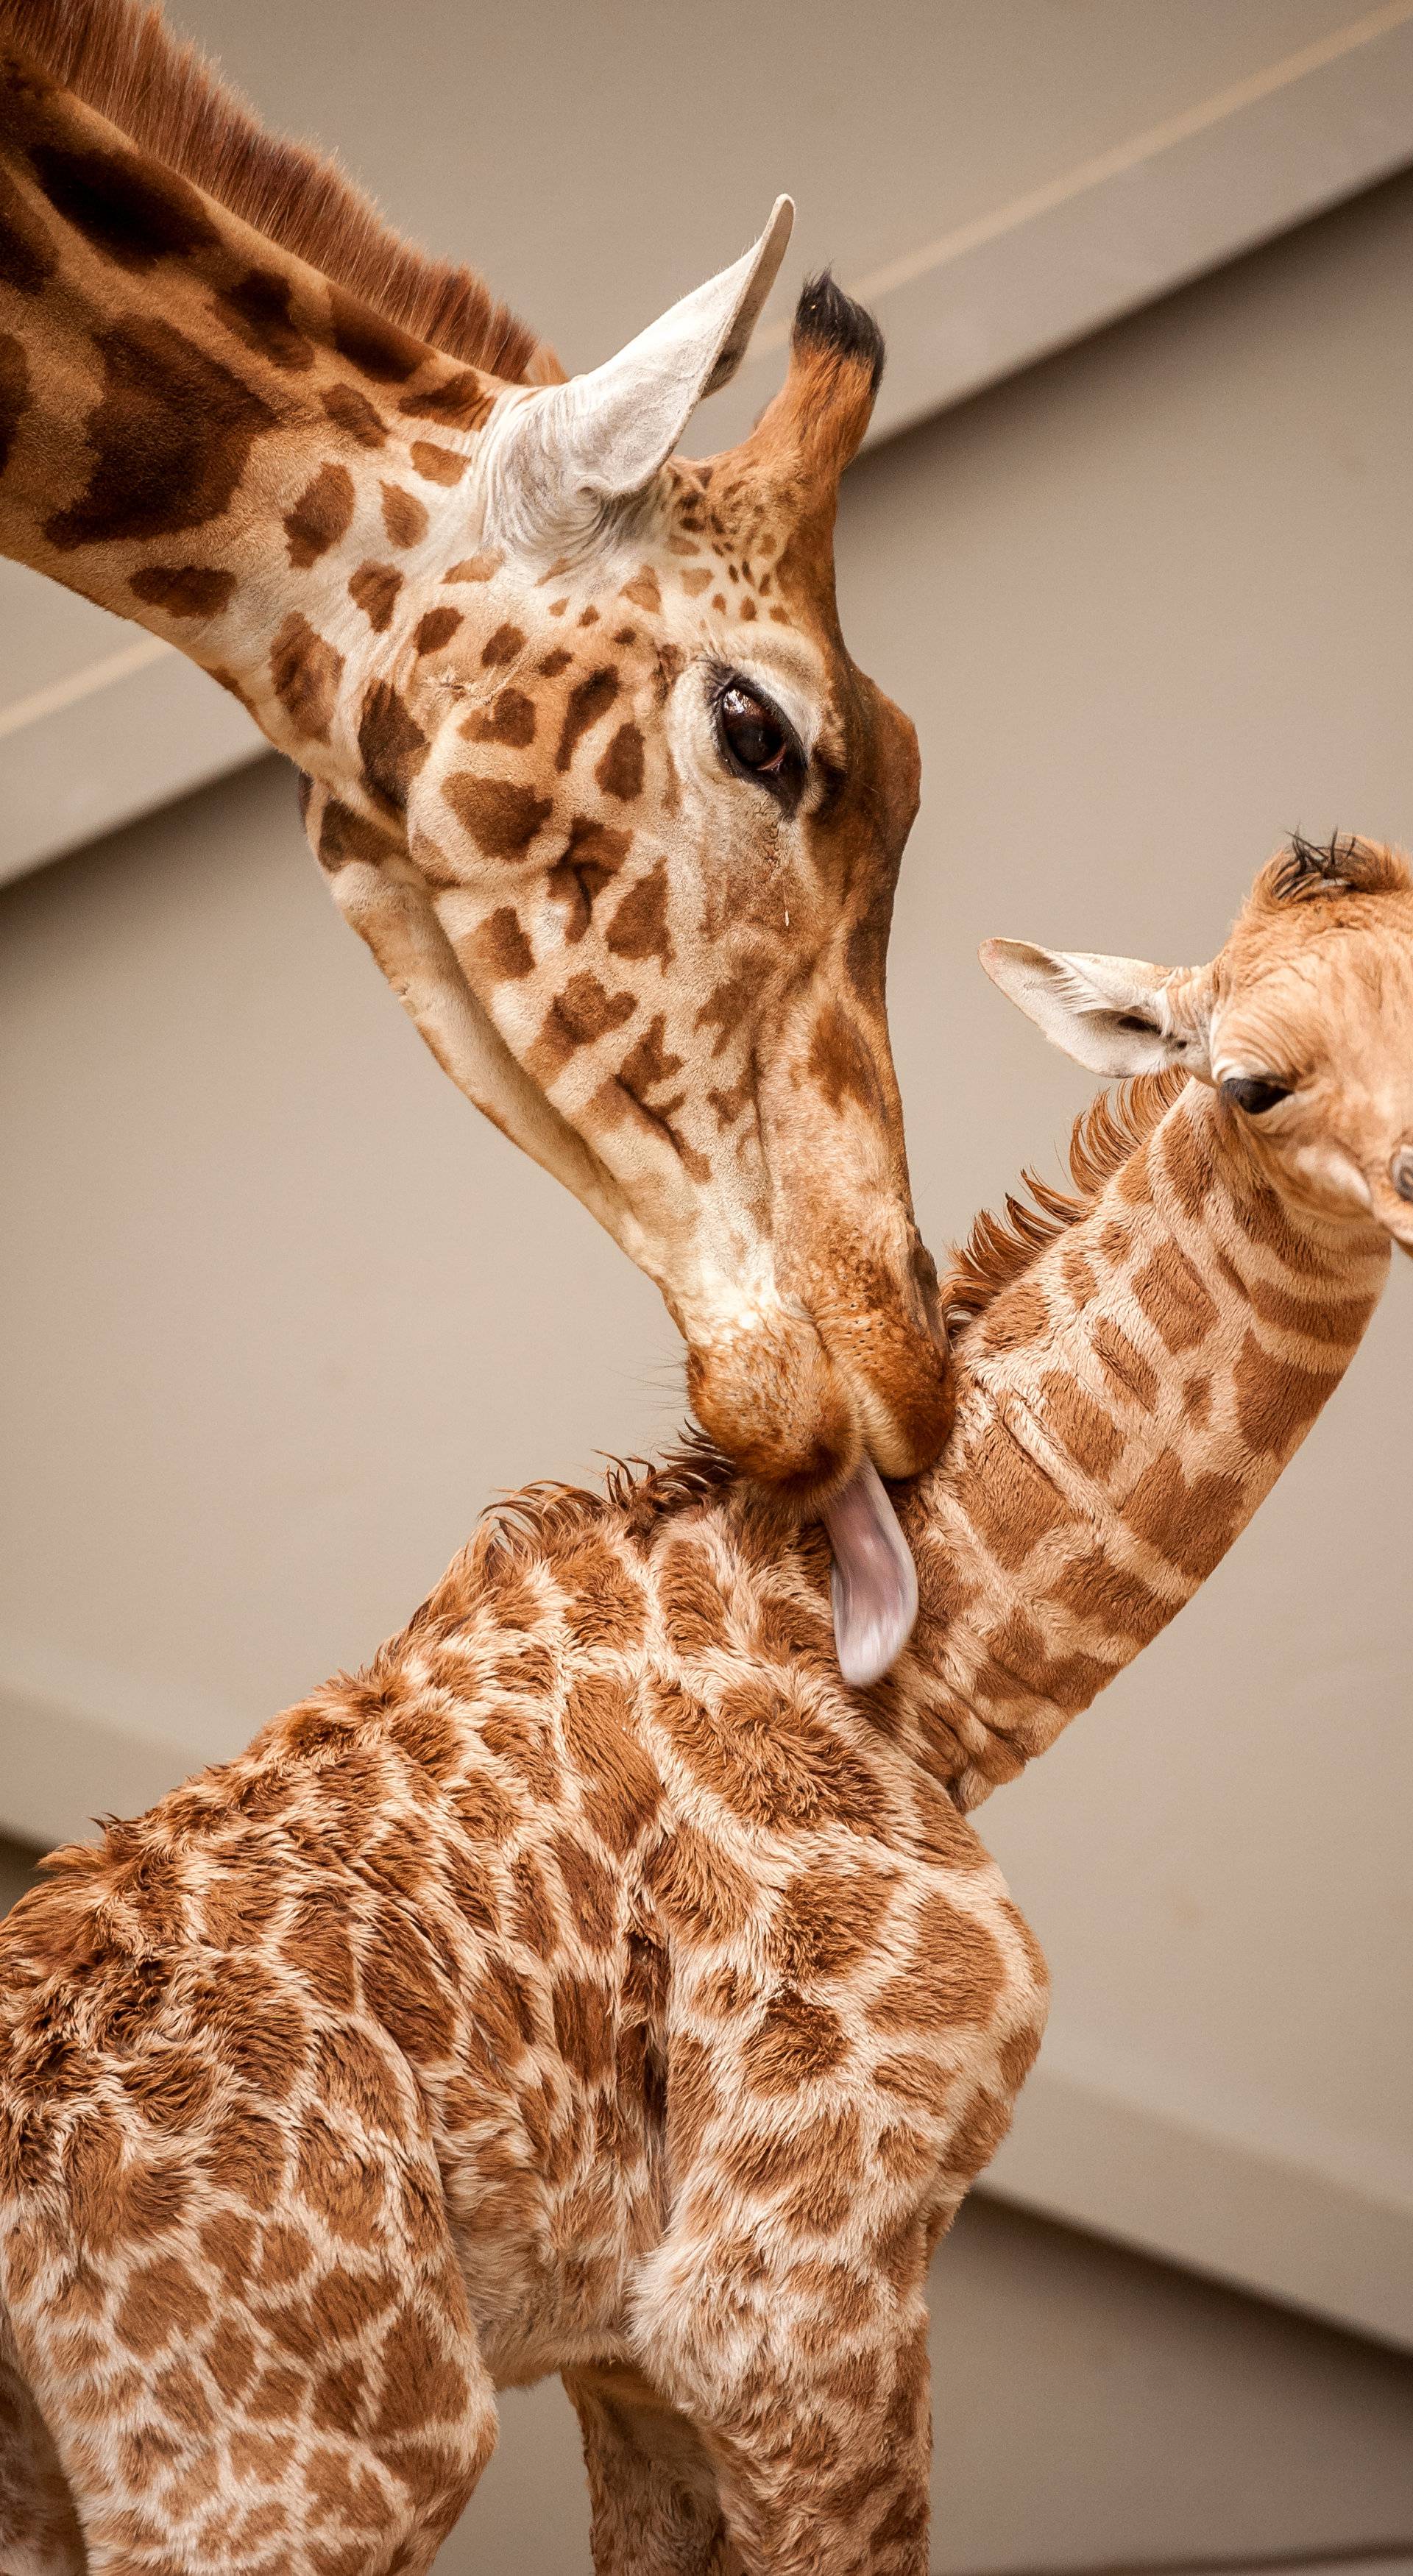 A baby giraffe is pictured next to its mother "Megara" in their enclosure at Planckendael's zoo near Mechelen